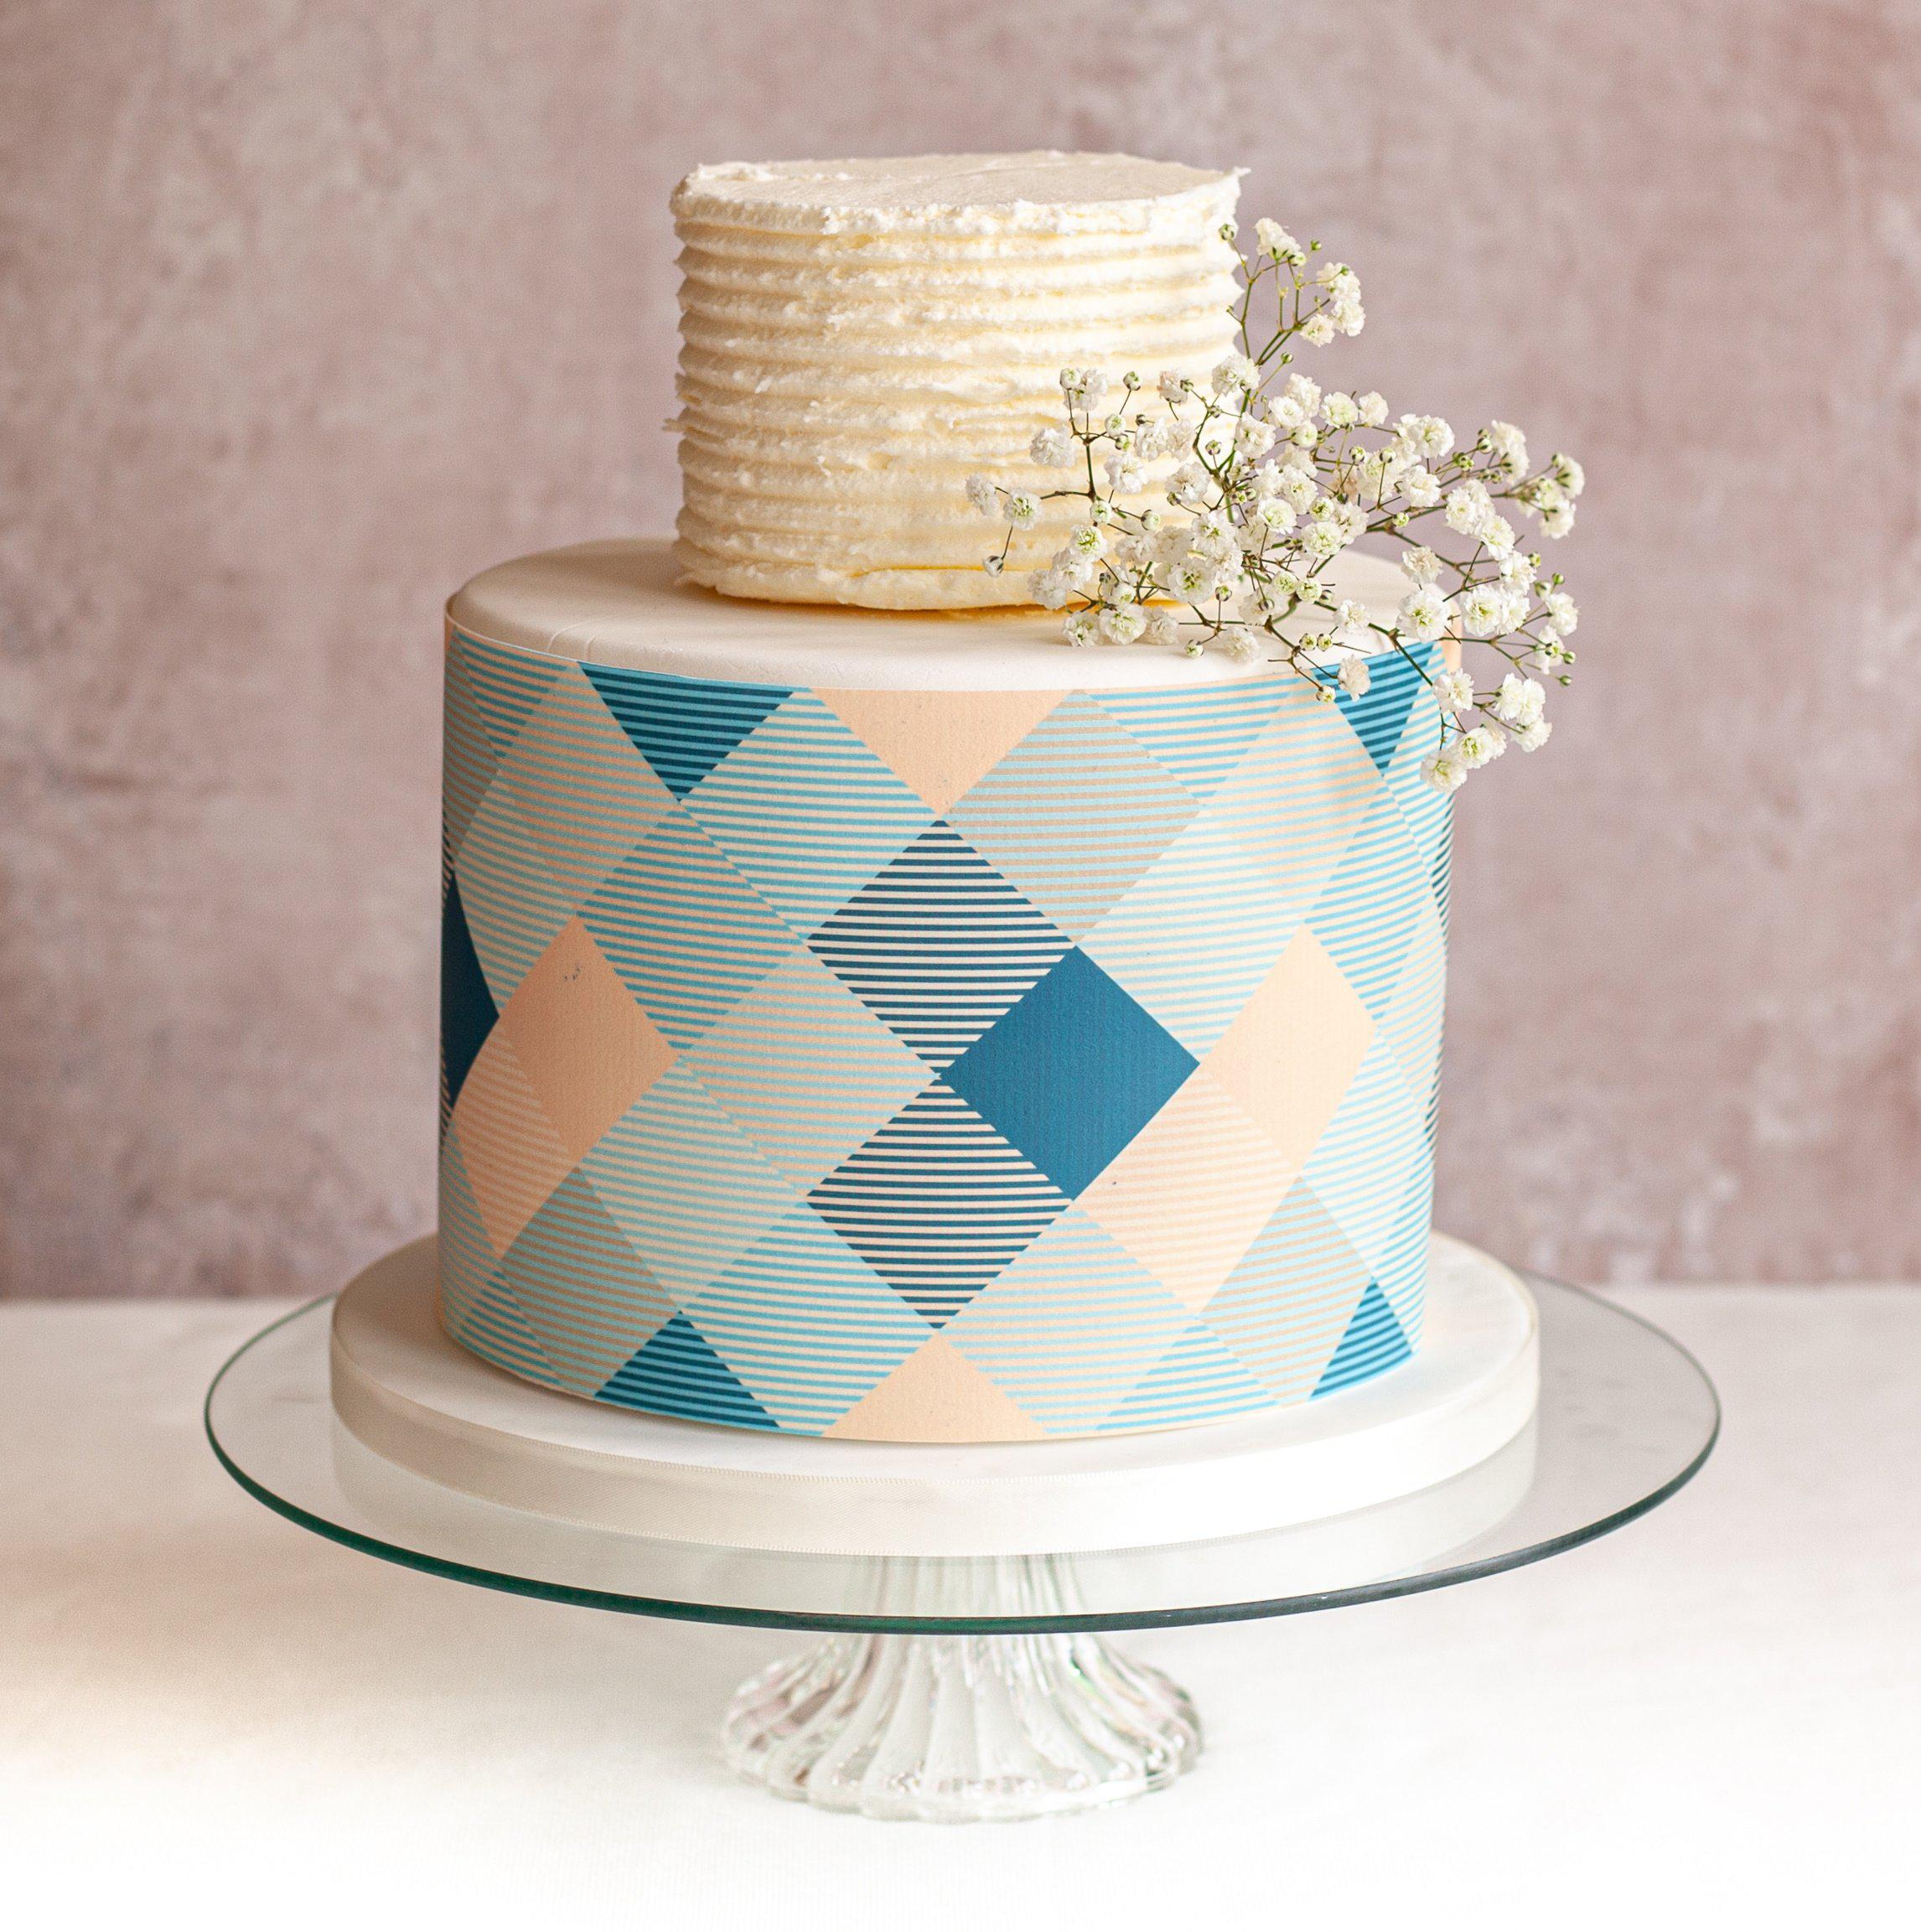 Wrap a Cake with Edible Images  Louis Vuitton Inspired Cake 